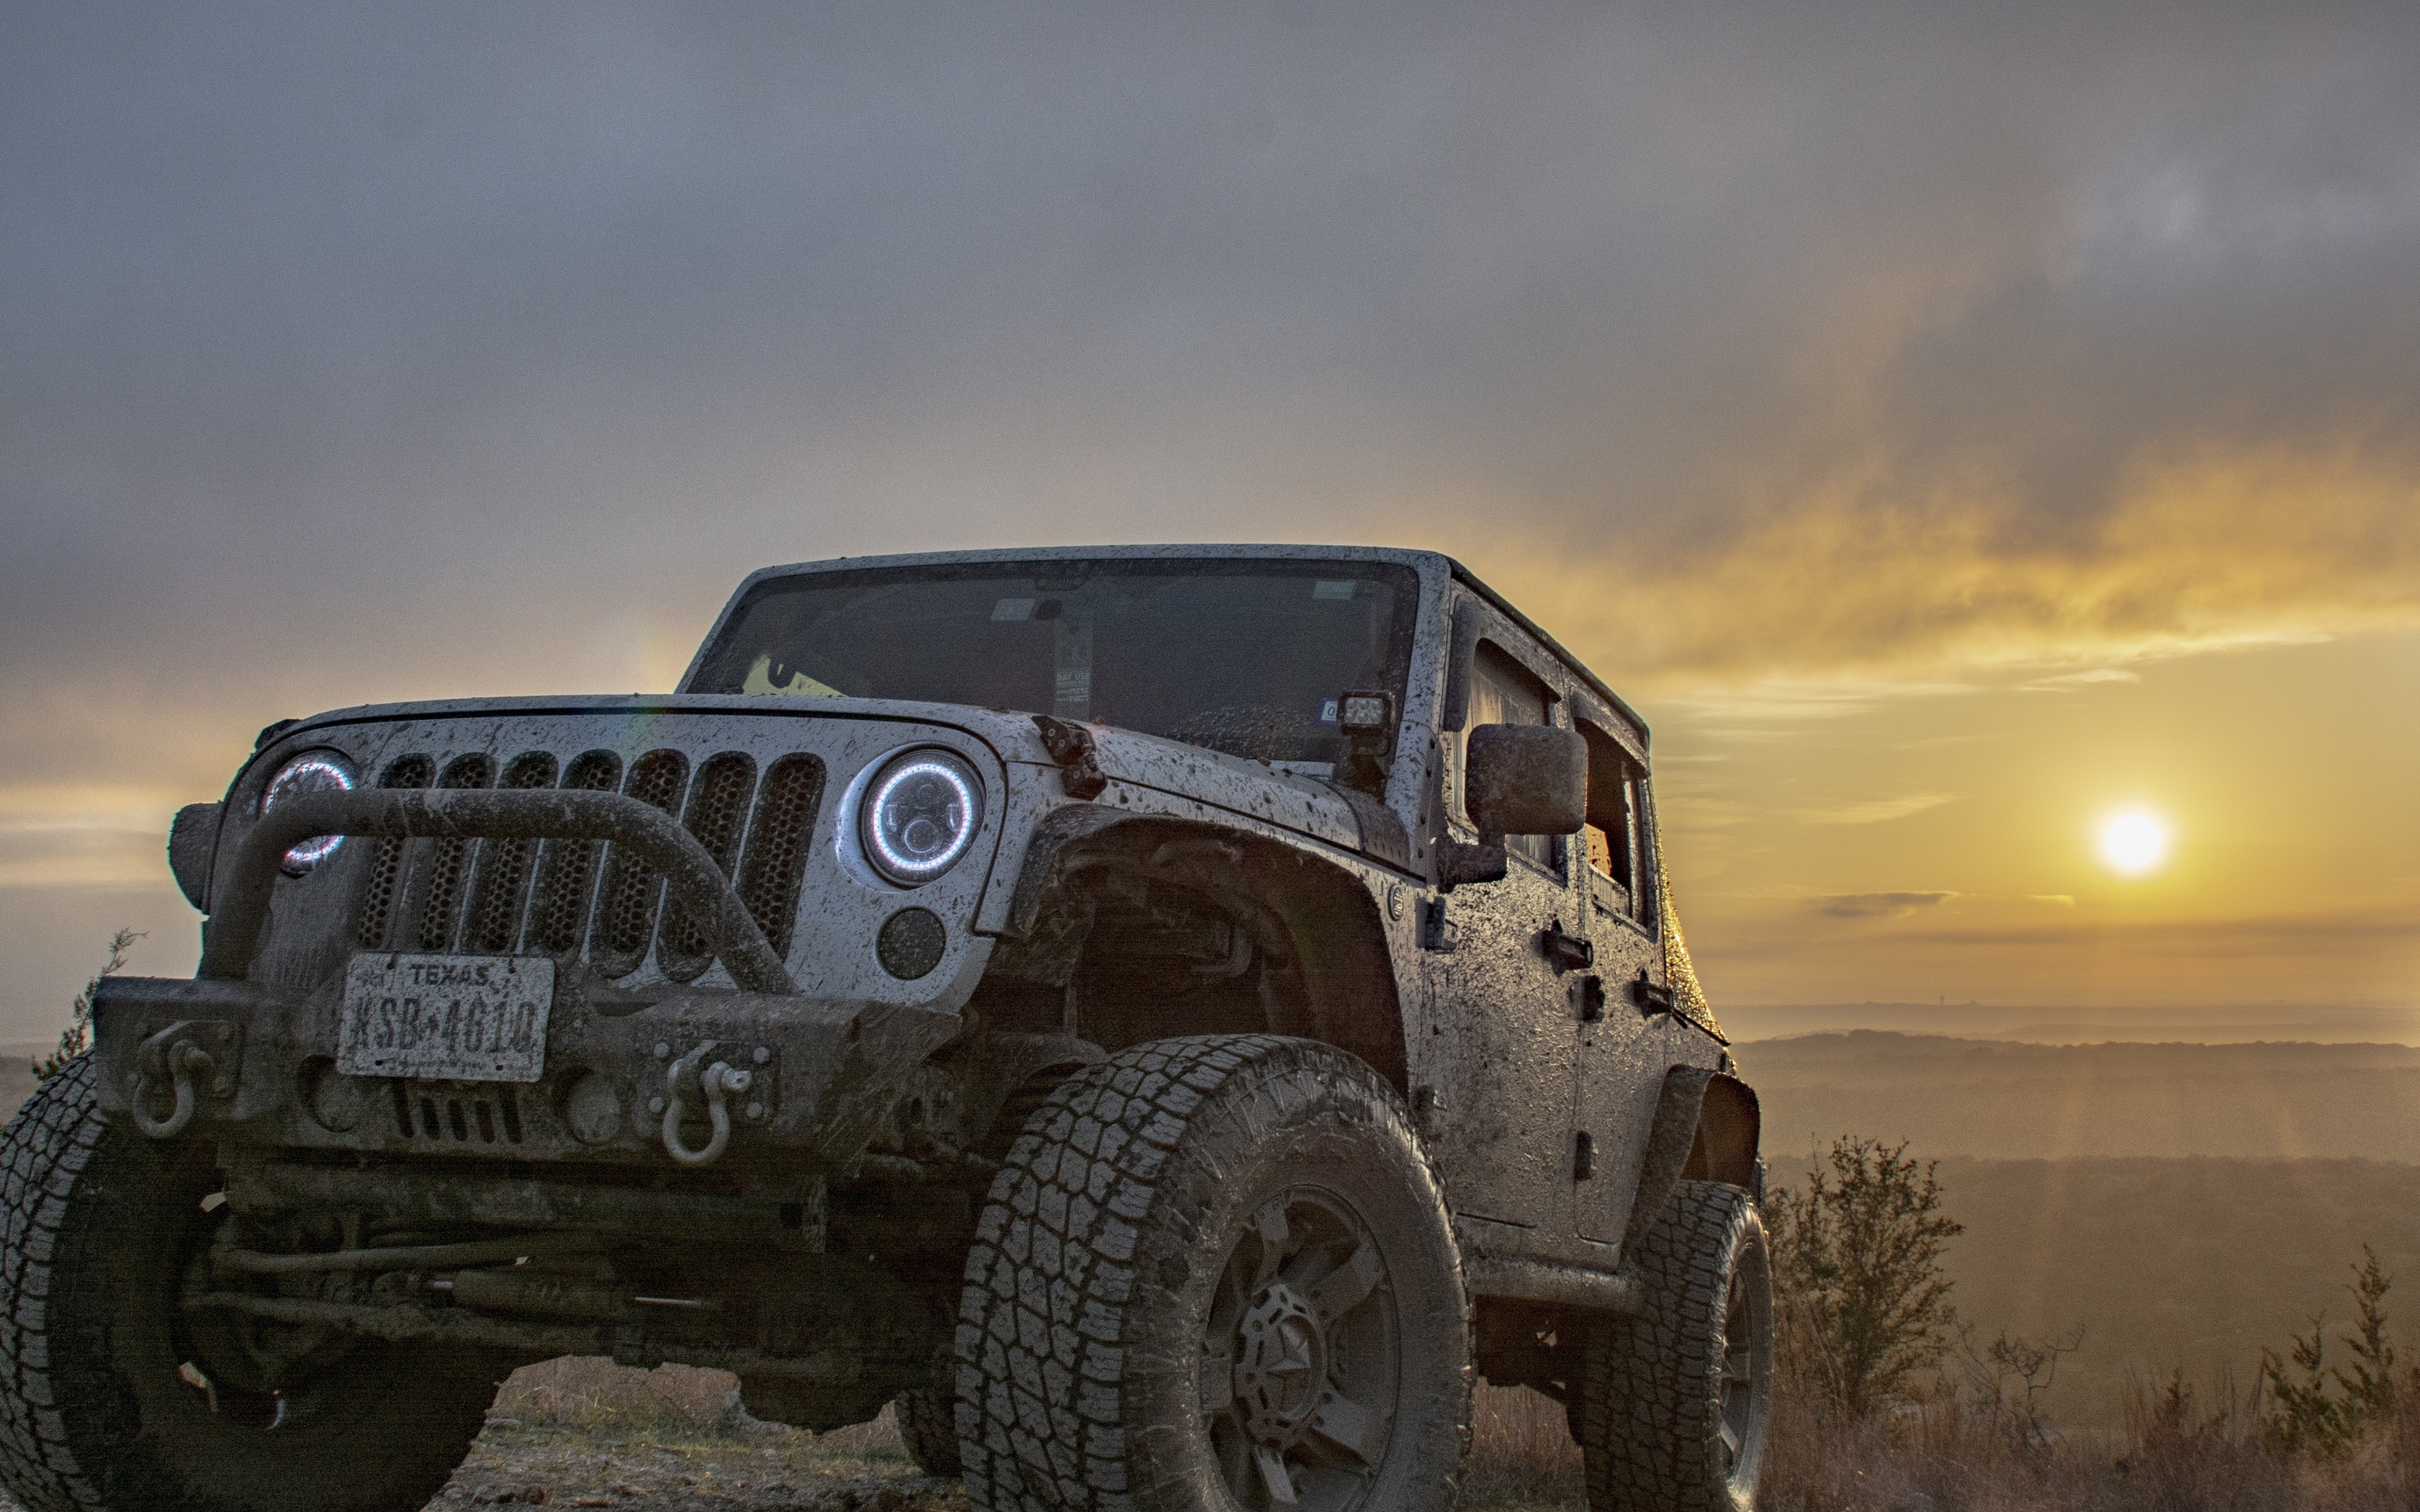 Download 2880x1800 Wallpaper Jeep Epic Car Off Road Outdoor Mac Pro Retaia Image Background 19441